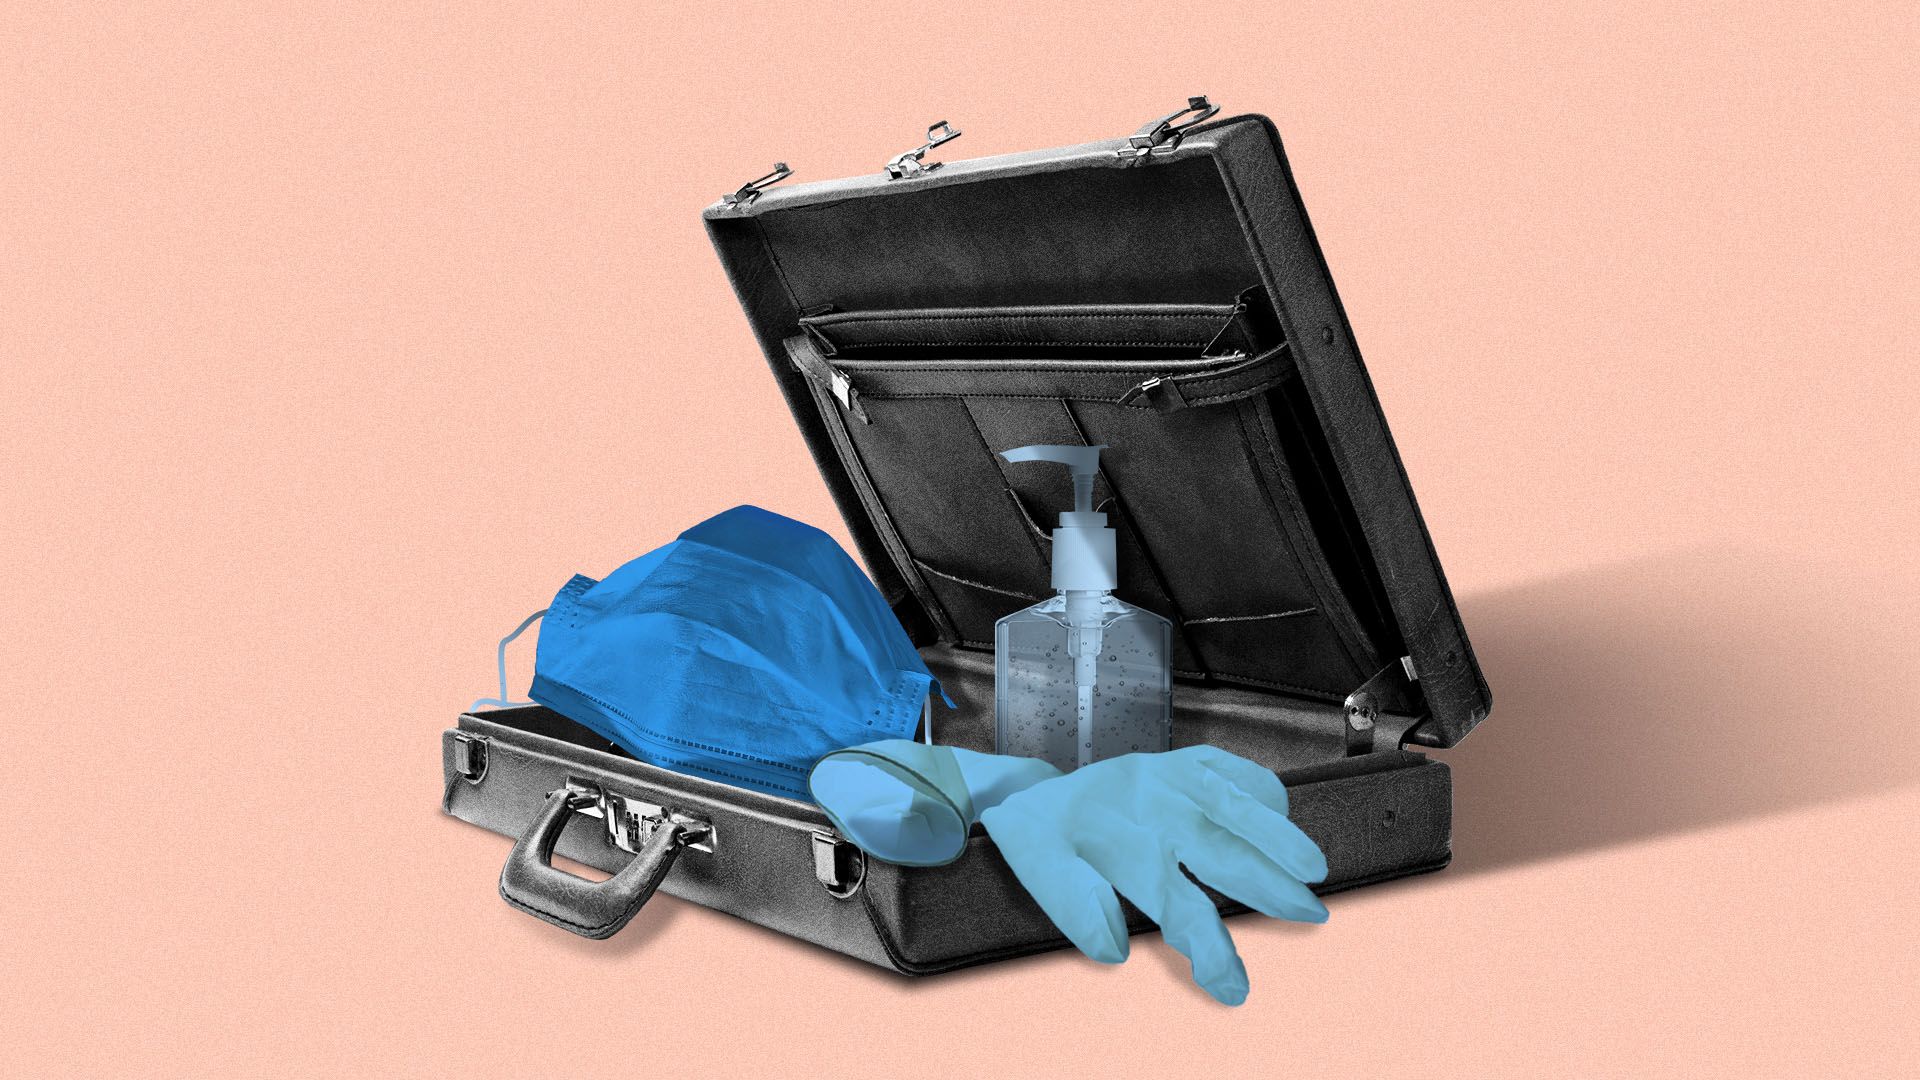 Illustration of an open briefcase filled a medical mask, gloves, and hand sanitizer